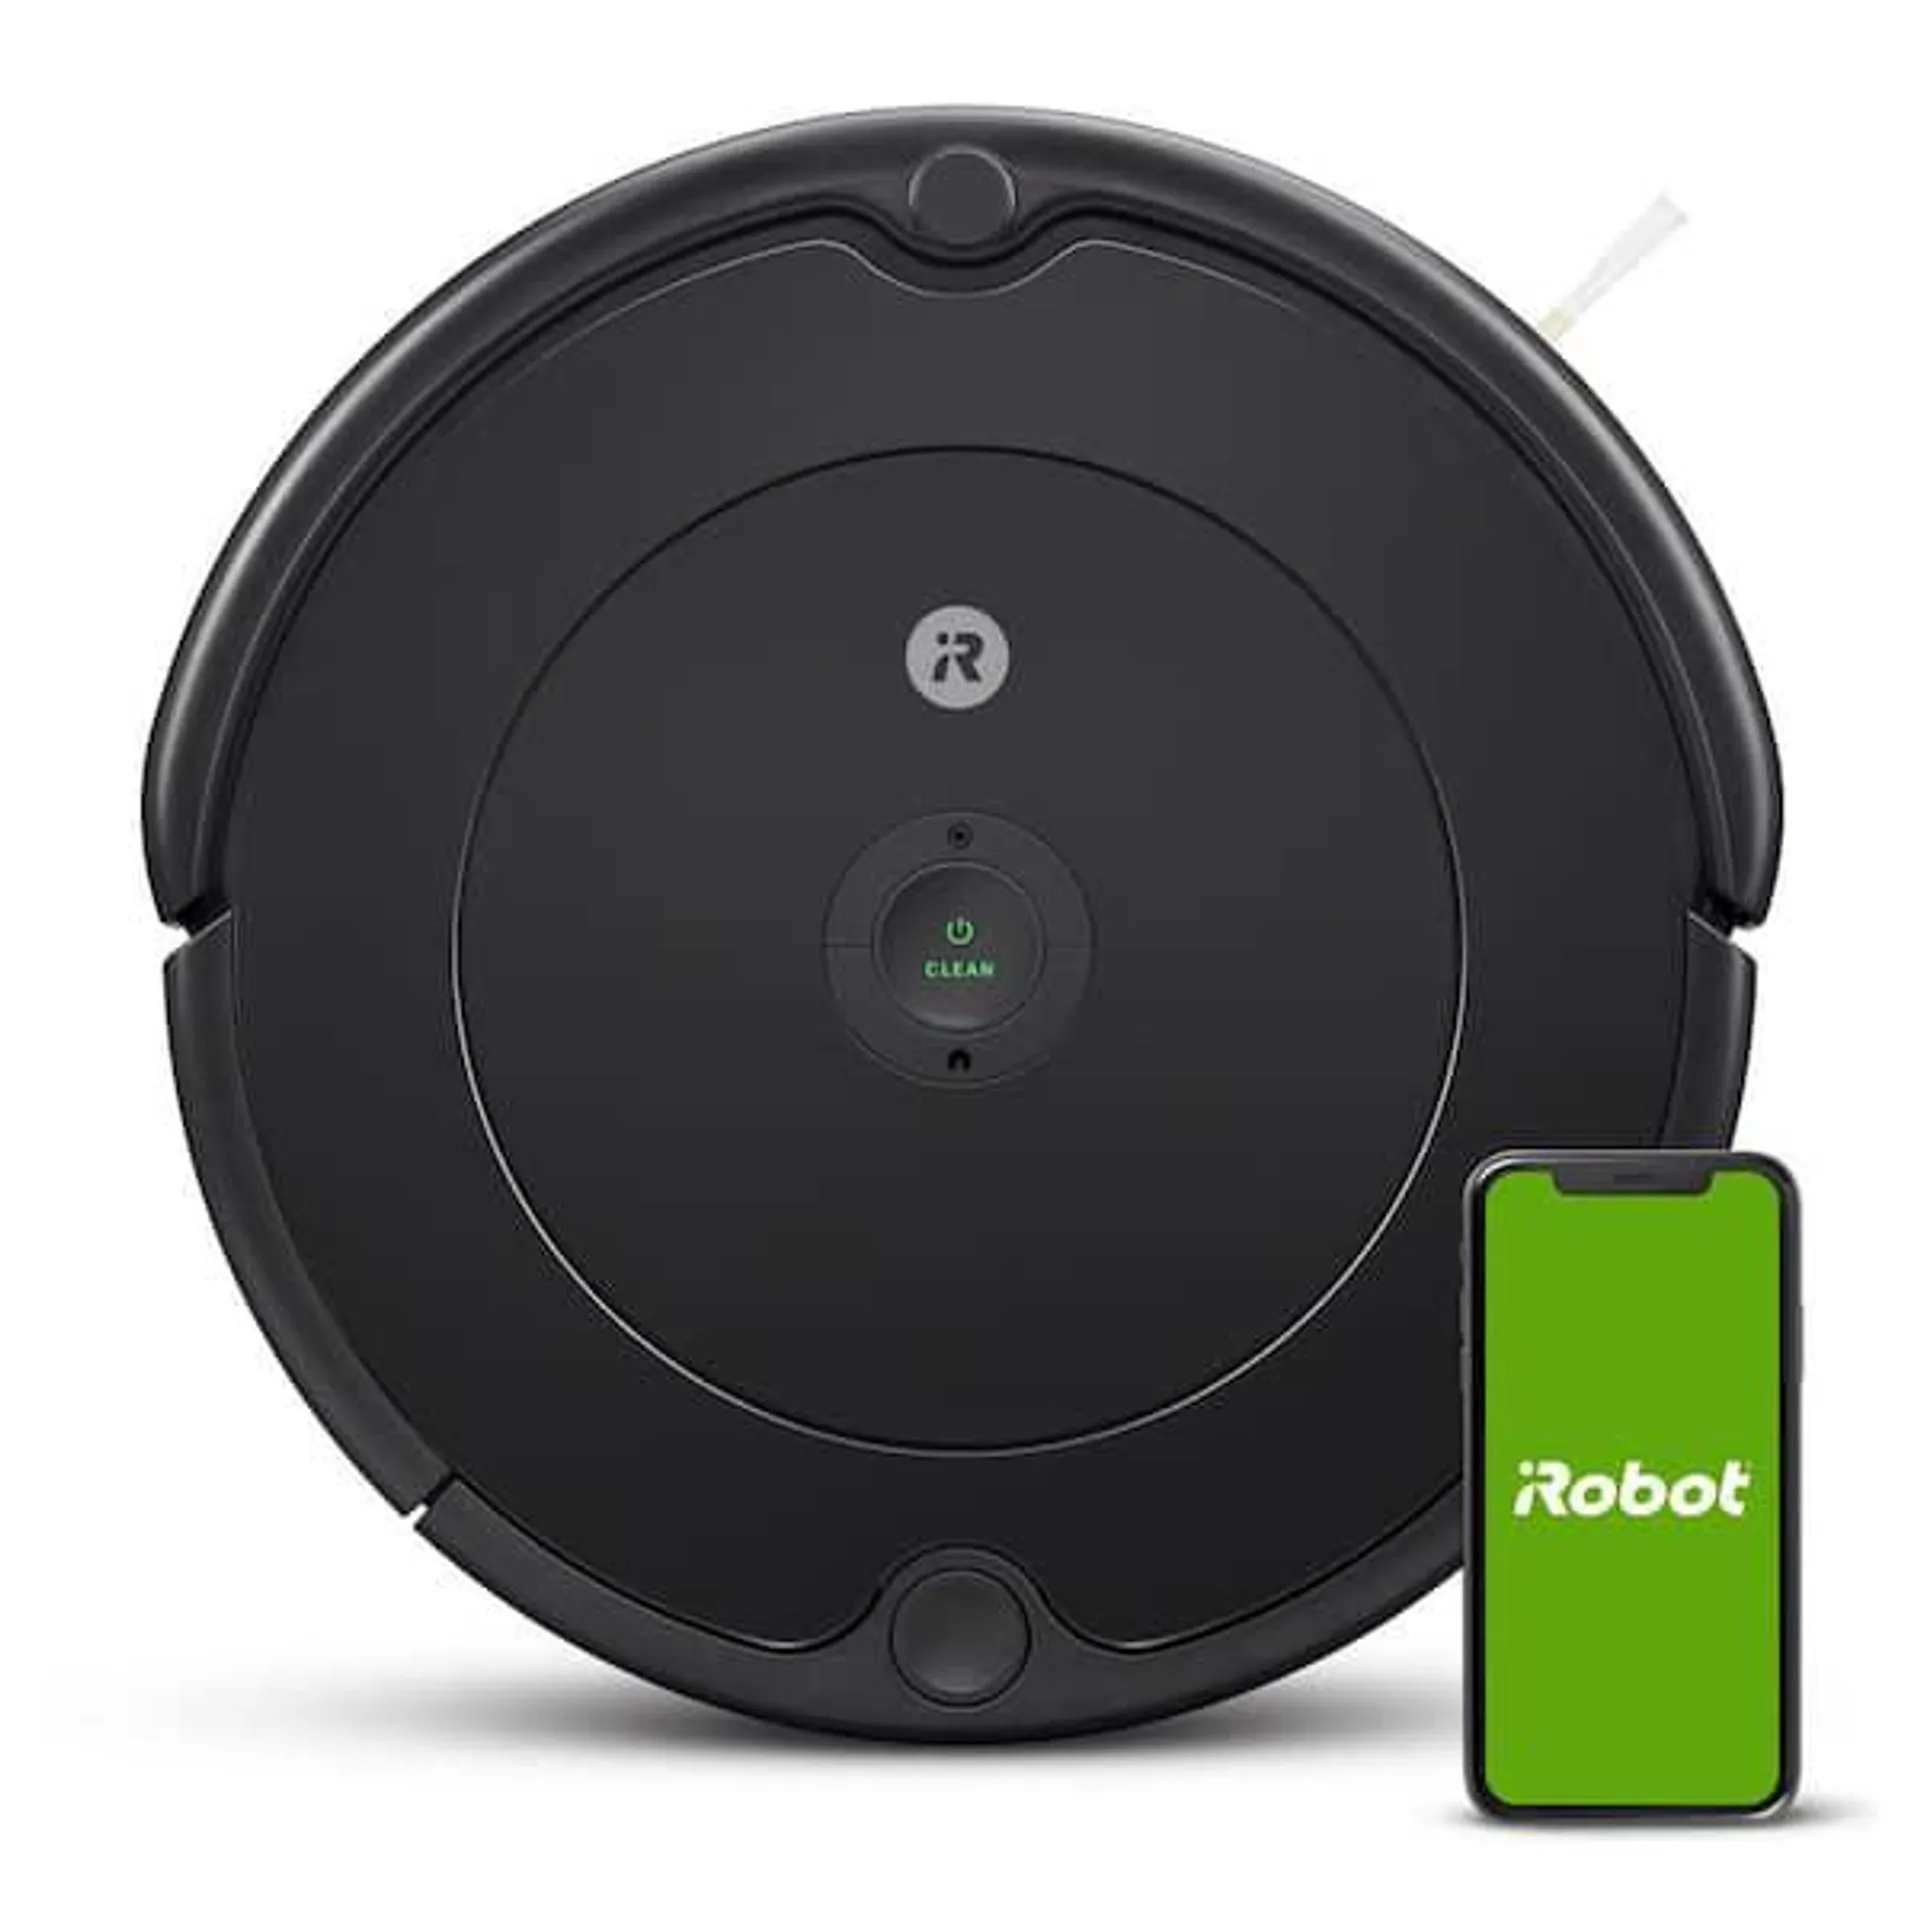 Roomba 694 Robot Vacuum – Wi-Fi Connected, Works with Pet Hair, Carpets, Hard Floors, Automatic Self-Charging